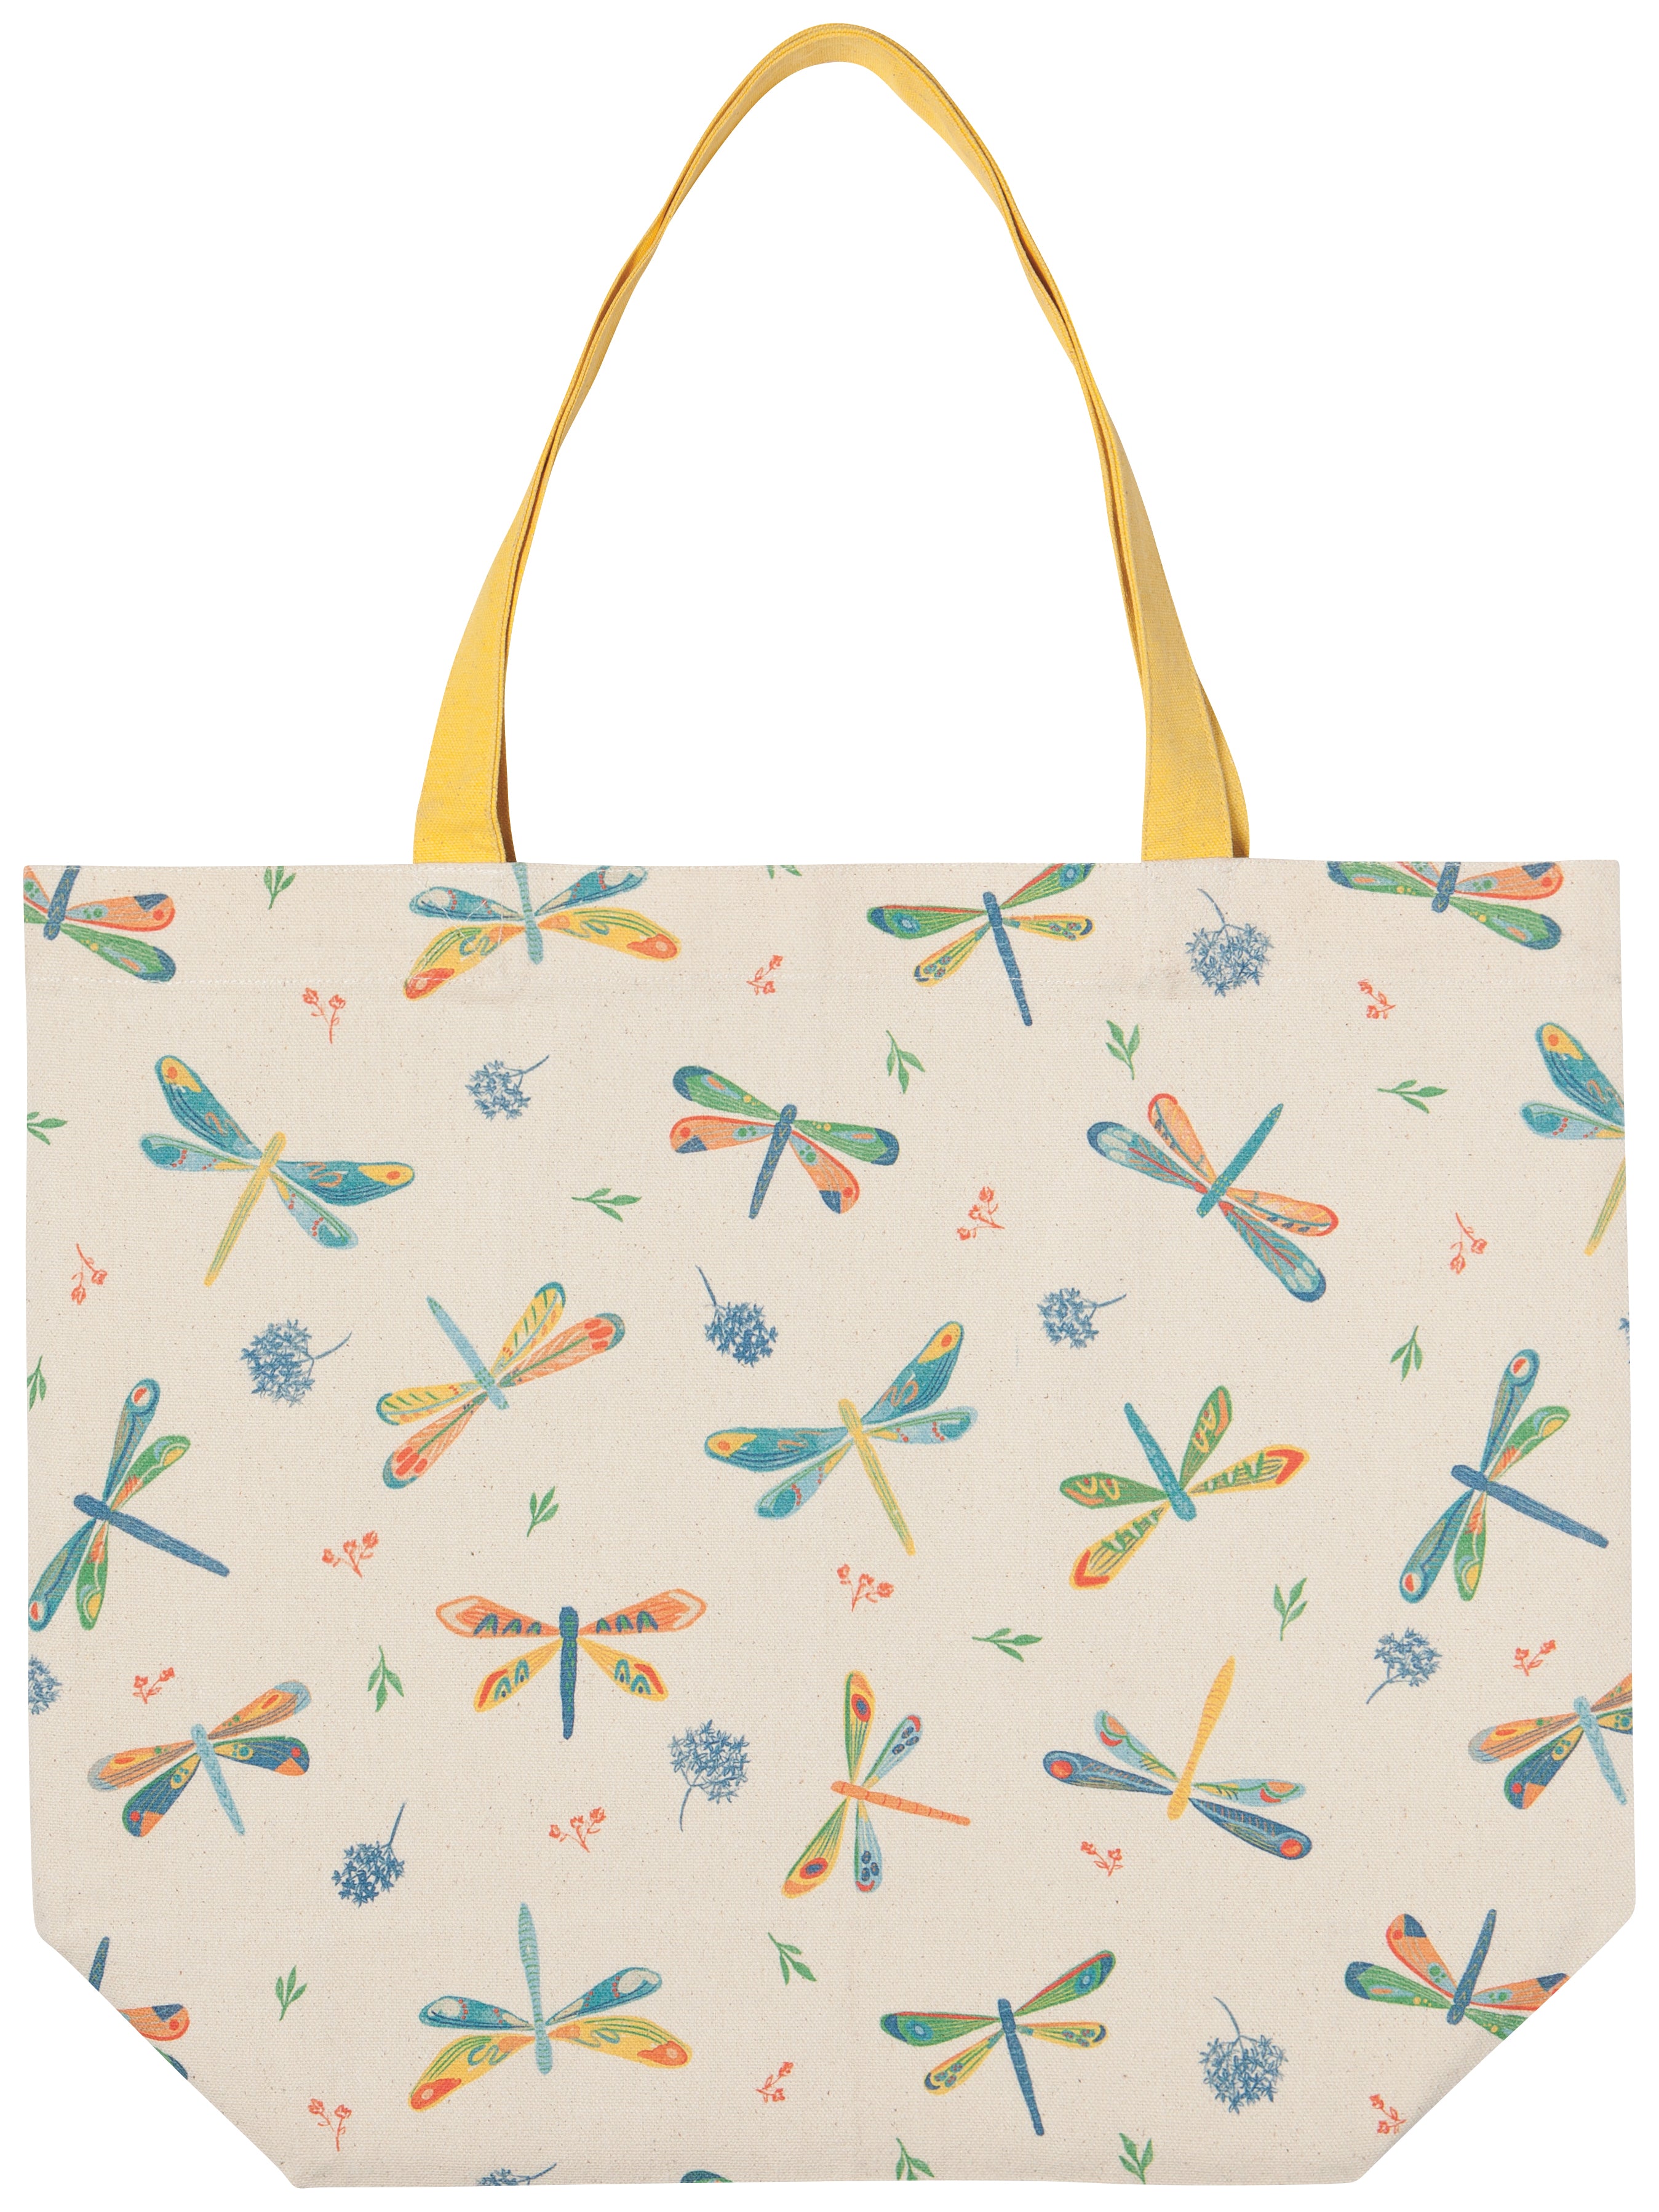 Beige tote with yellow handles, and a vintage colourful dragonfly pattern